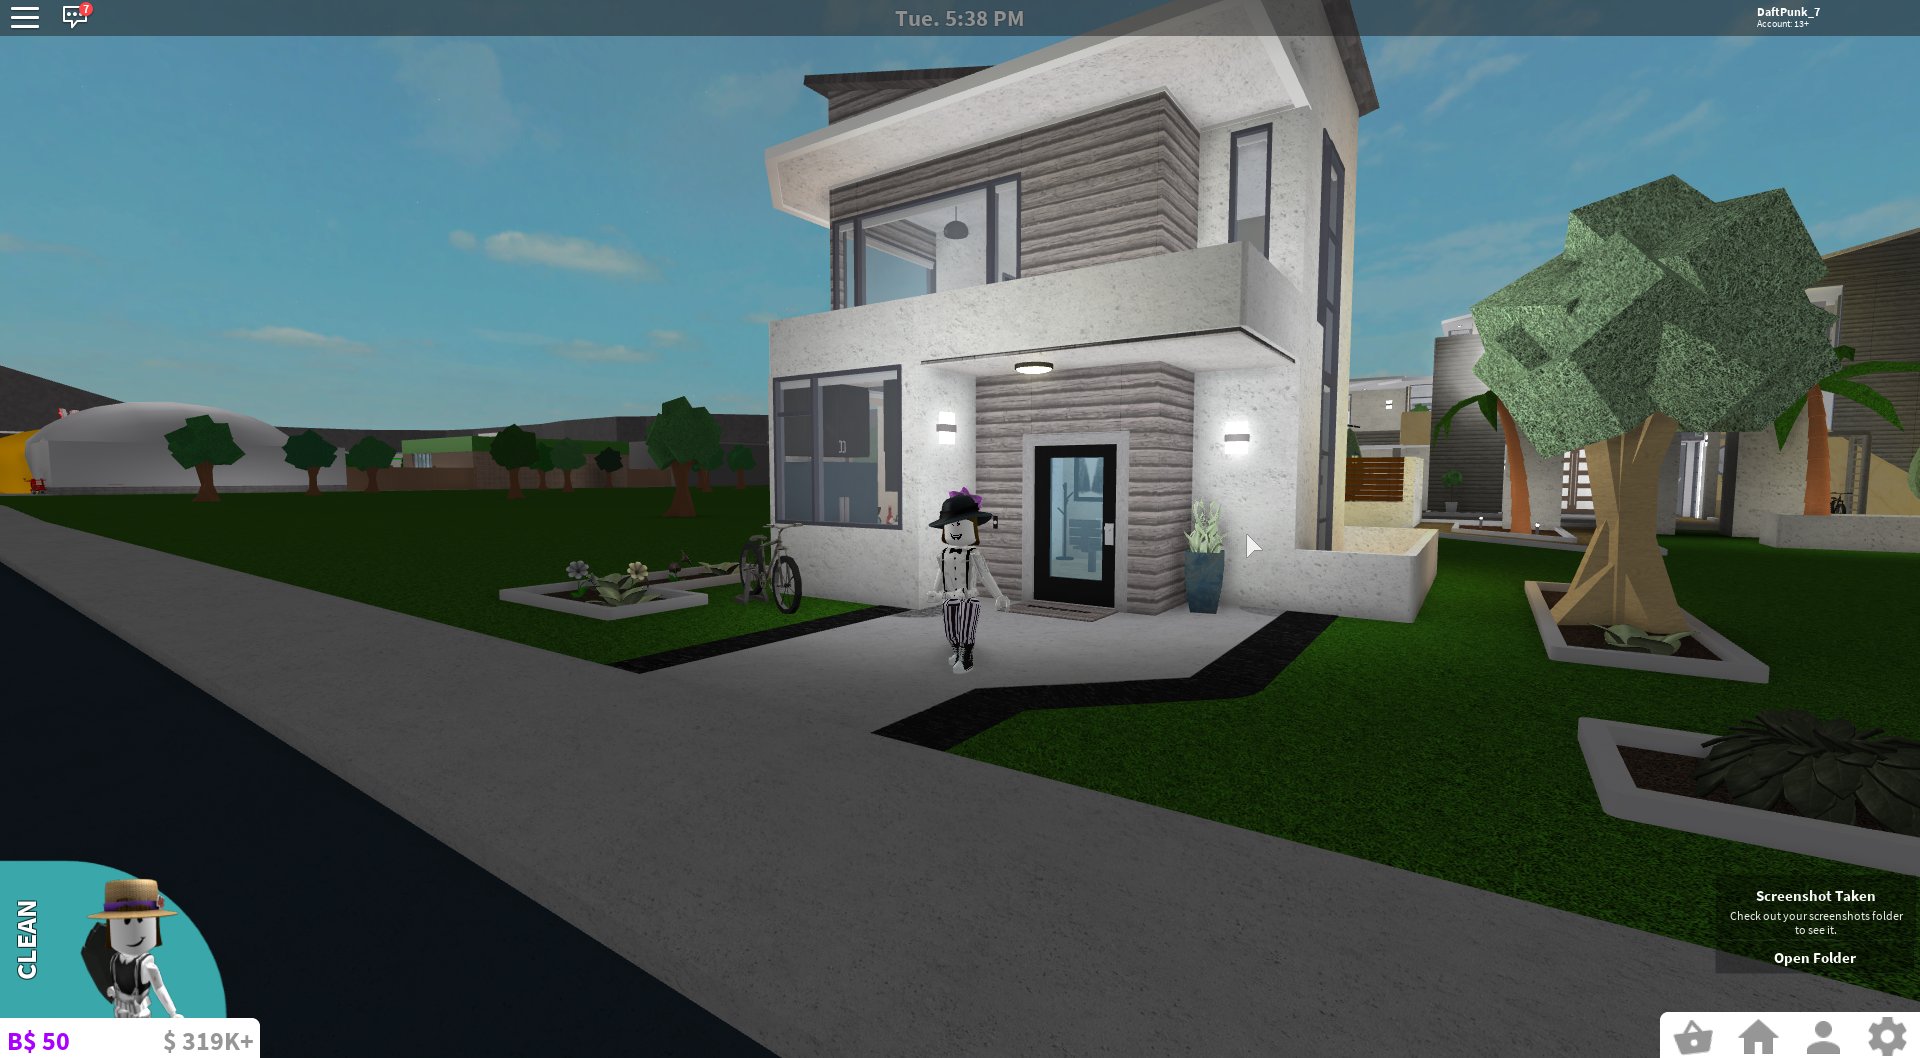 How To Build A House In Bloxburg 2 Story 20k